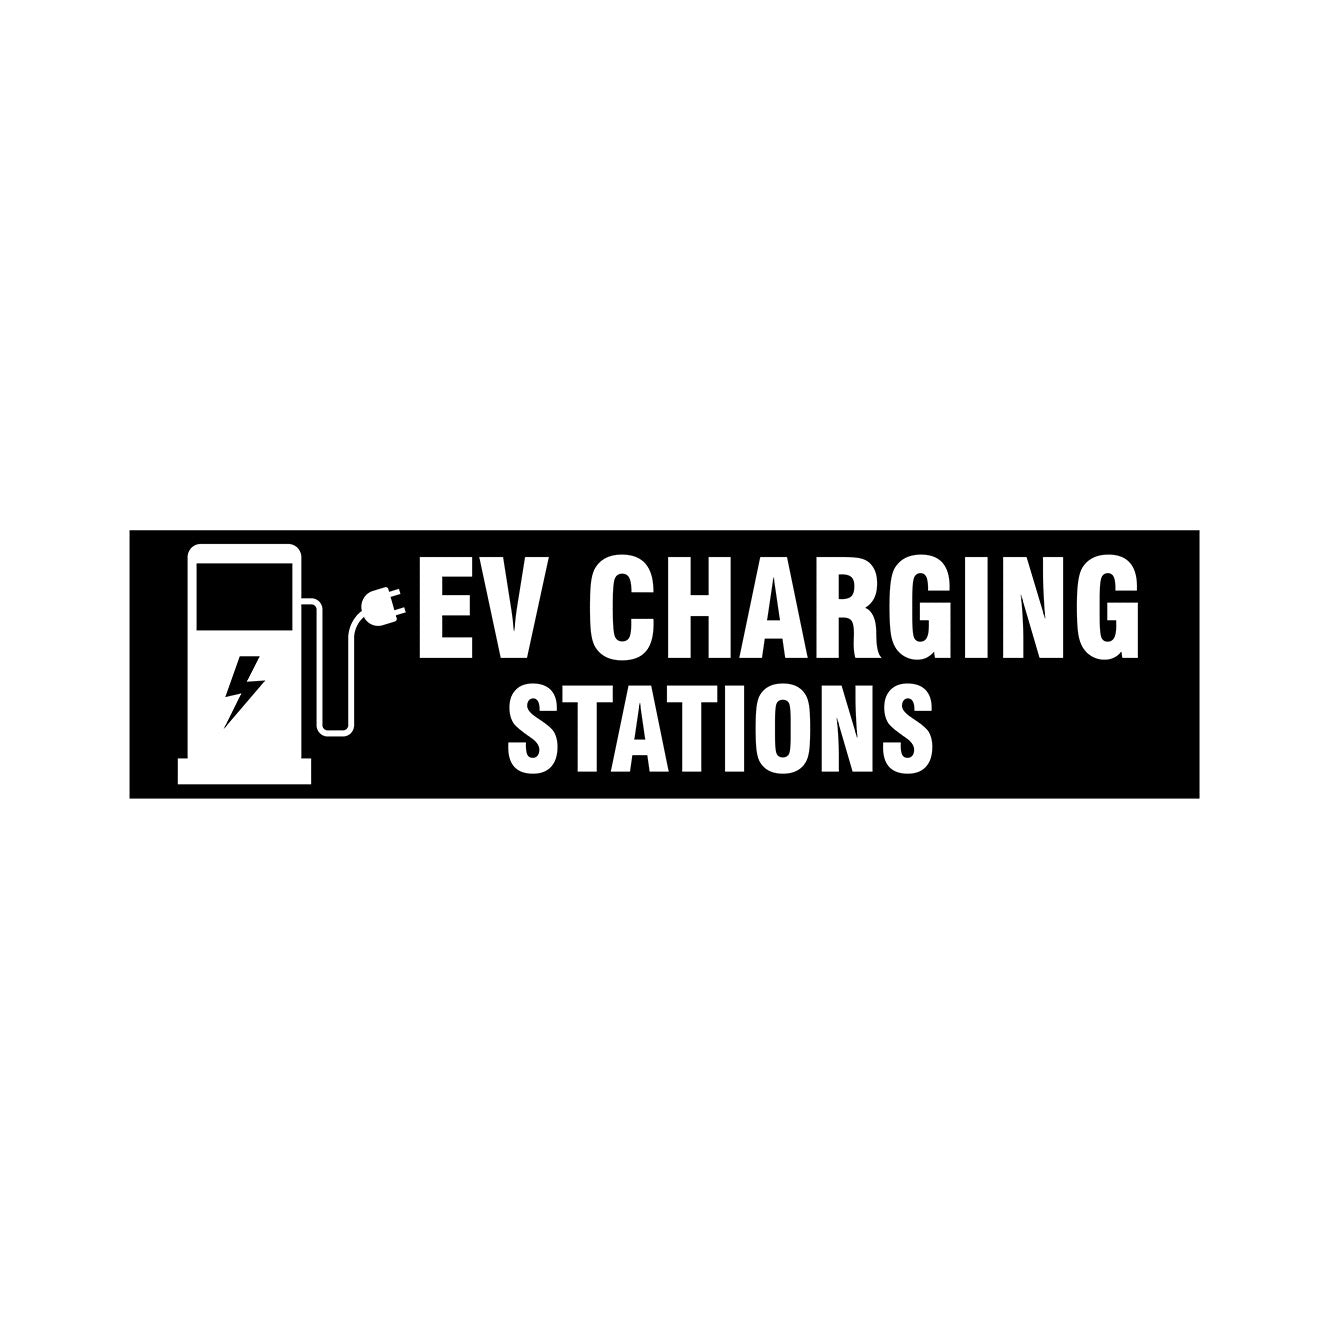 ELECTRICAL VEHICLE (EV) CHARGING STATIONS SIGN